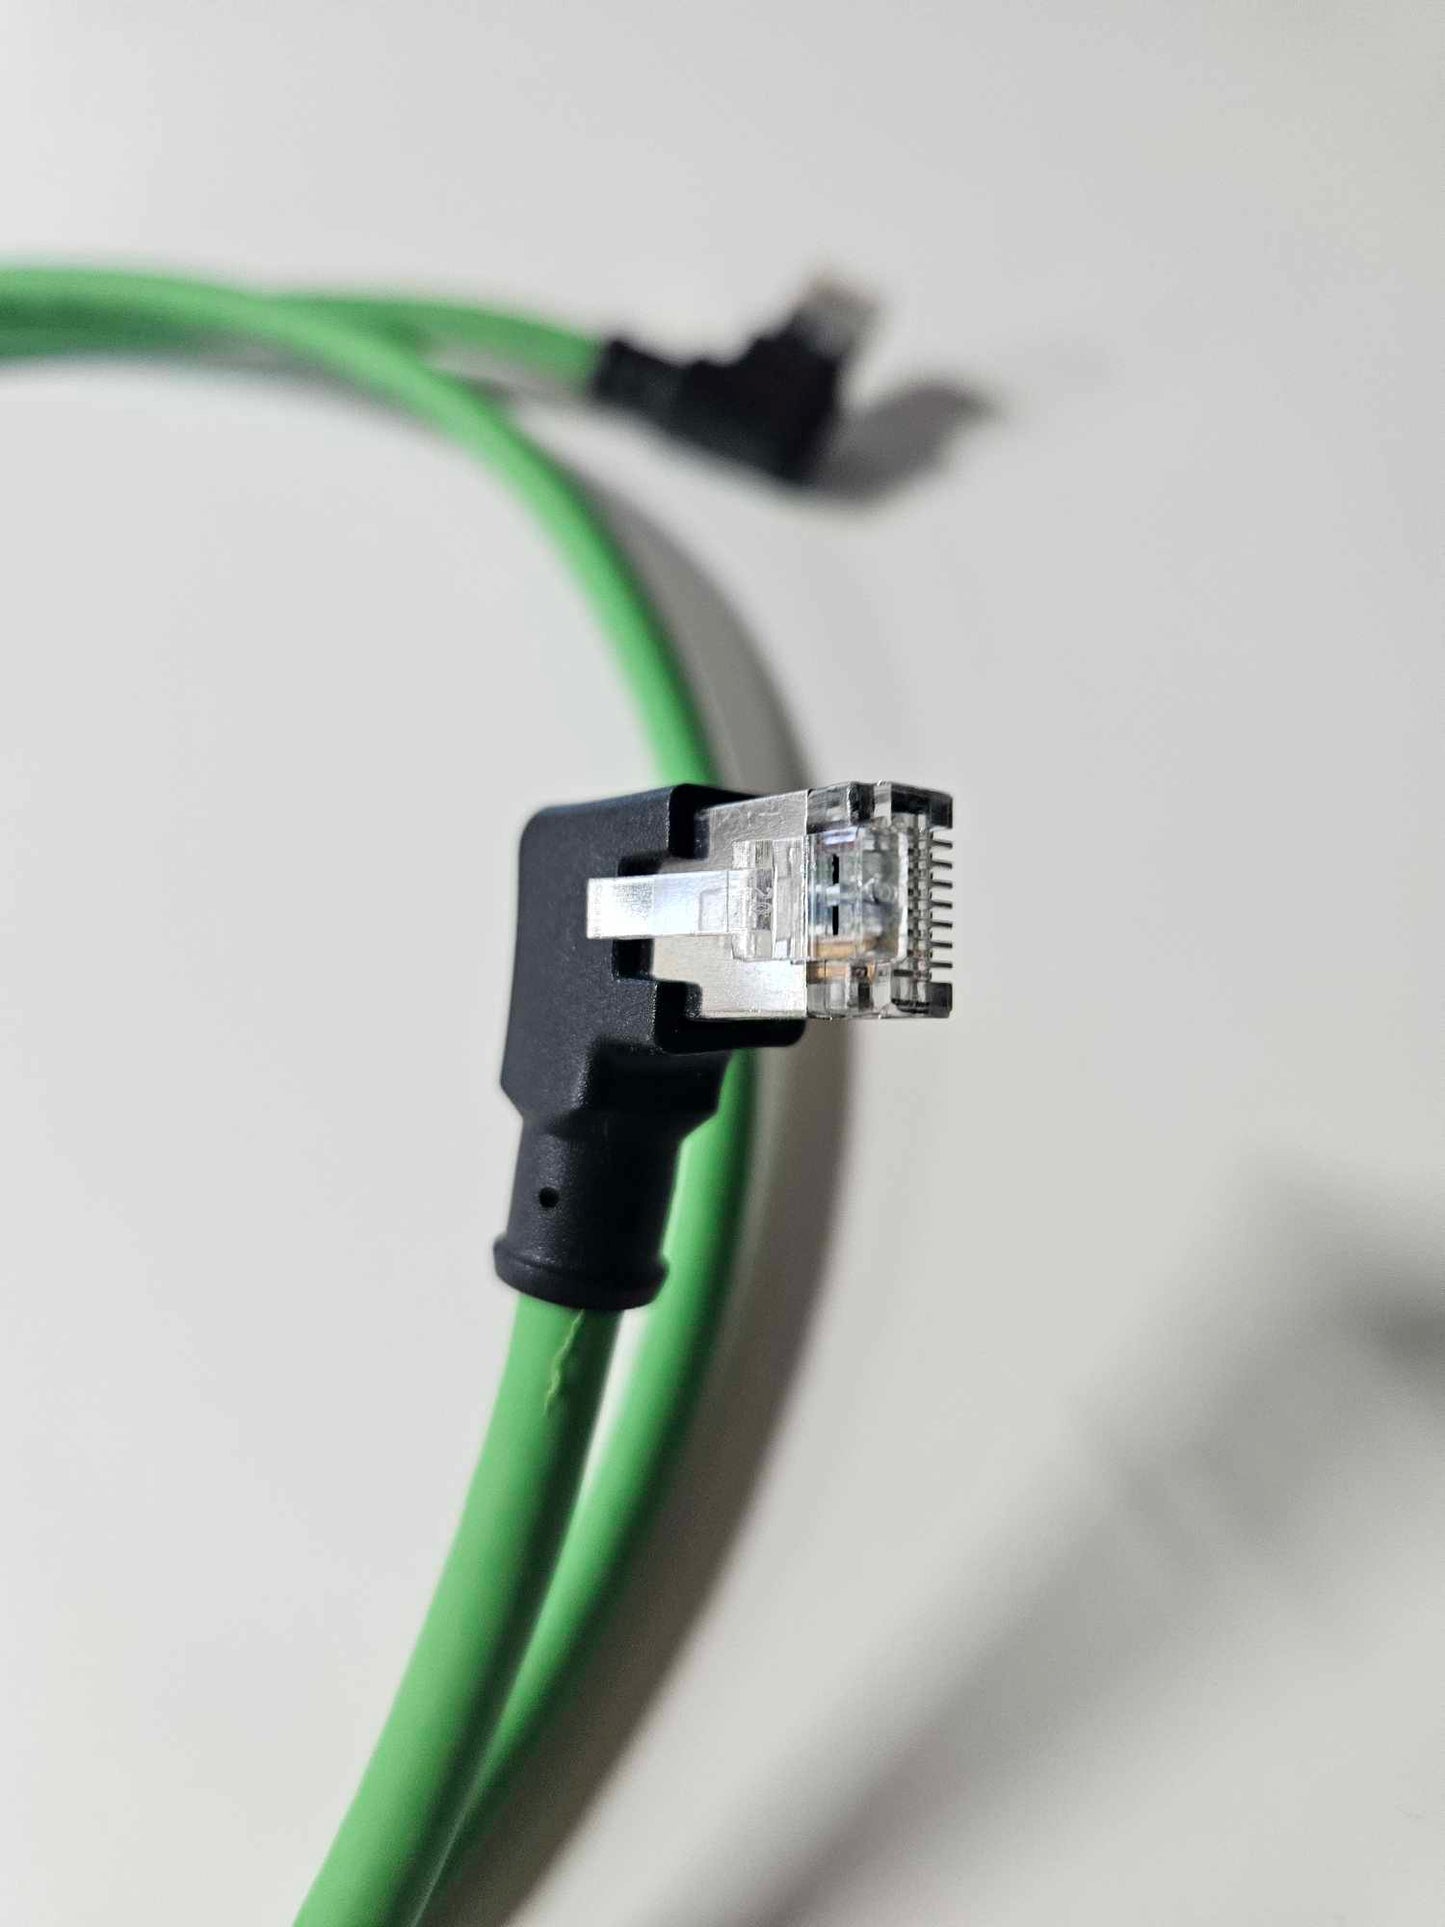 Hoson N10 Logistics cable to connect mainboard to headboard